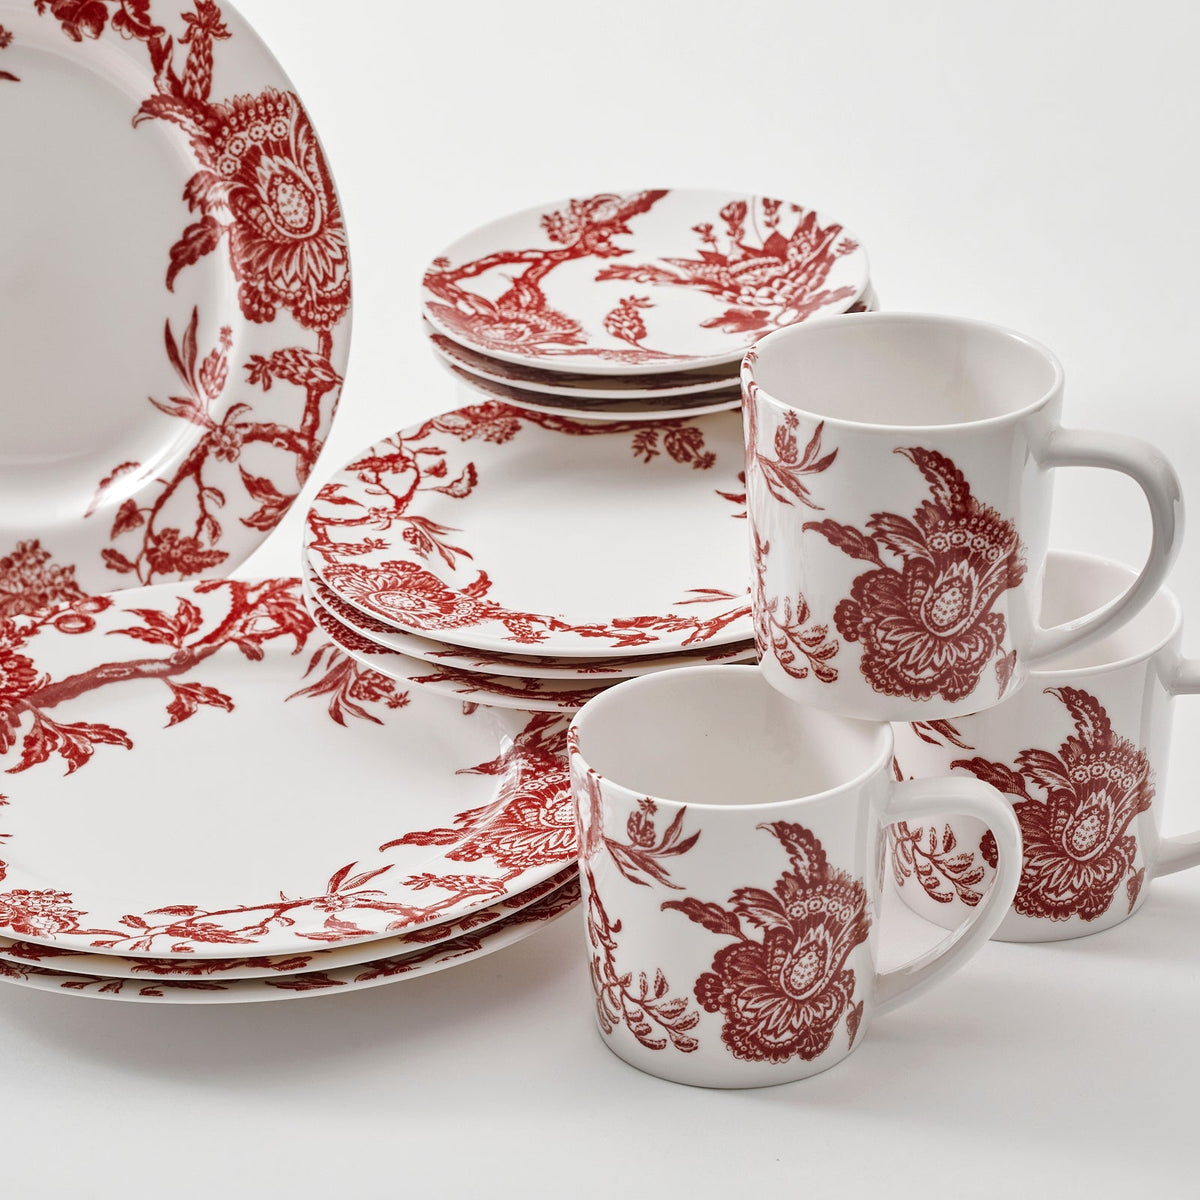 Close Up Showing mugs in the Arcadia Crimson 16 Piece dinnerware Set for 4 in high-fired porcelain from Caskata. Set includes 4 dinner plates, 4 salad plates, 4 canape plates, and 4 mugs.